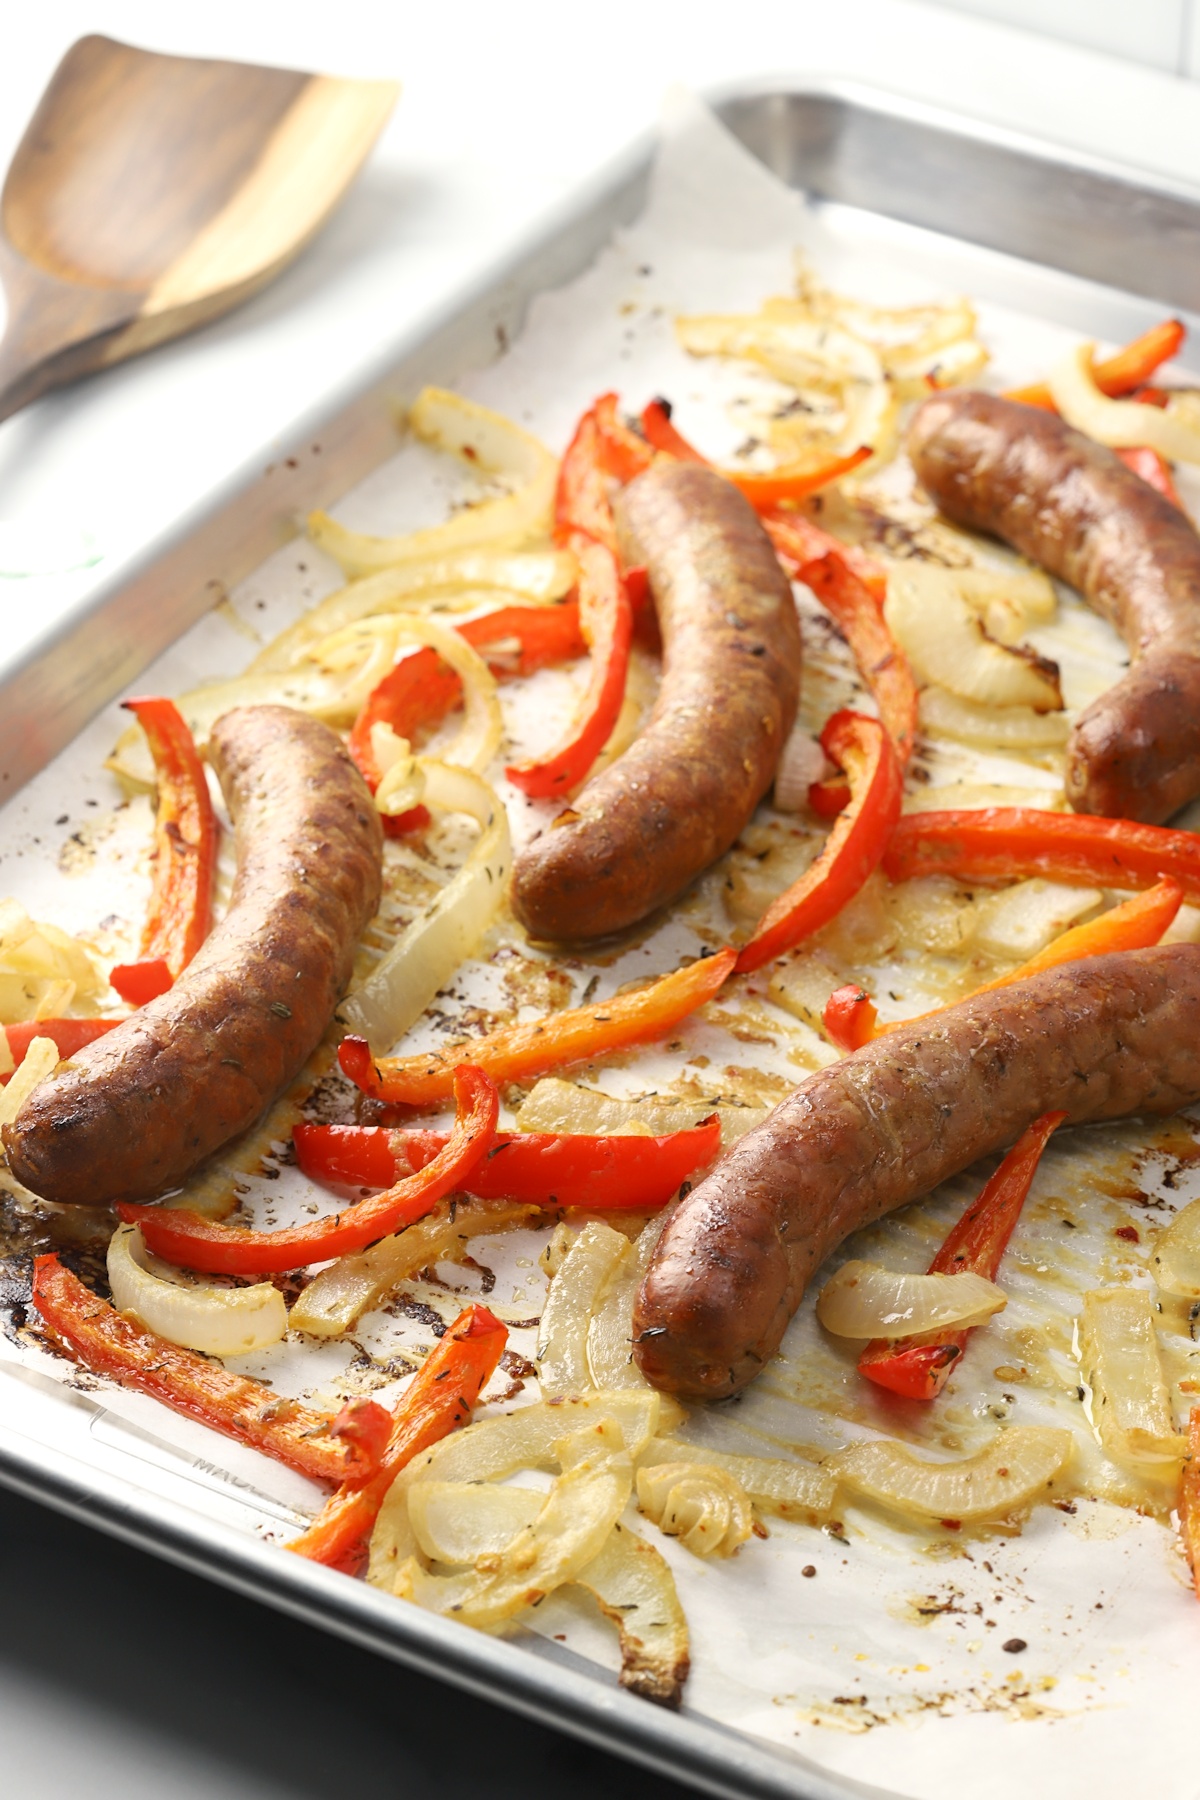 Sheet pan filled with roasted onions, peppers, and bratwurst.